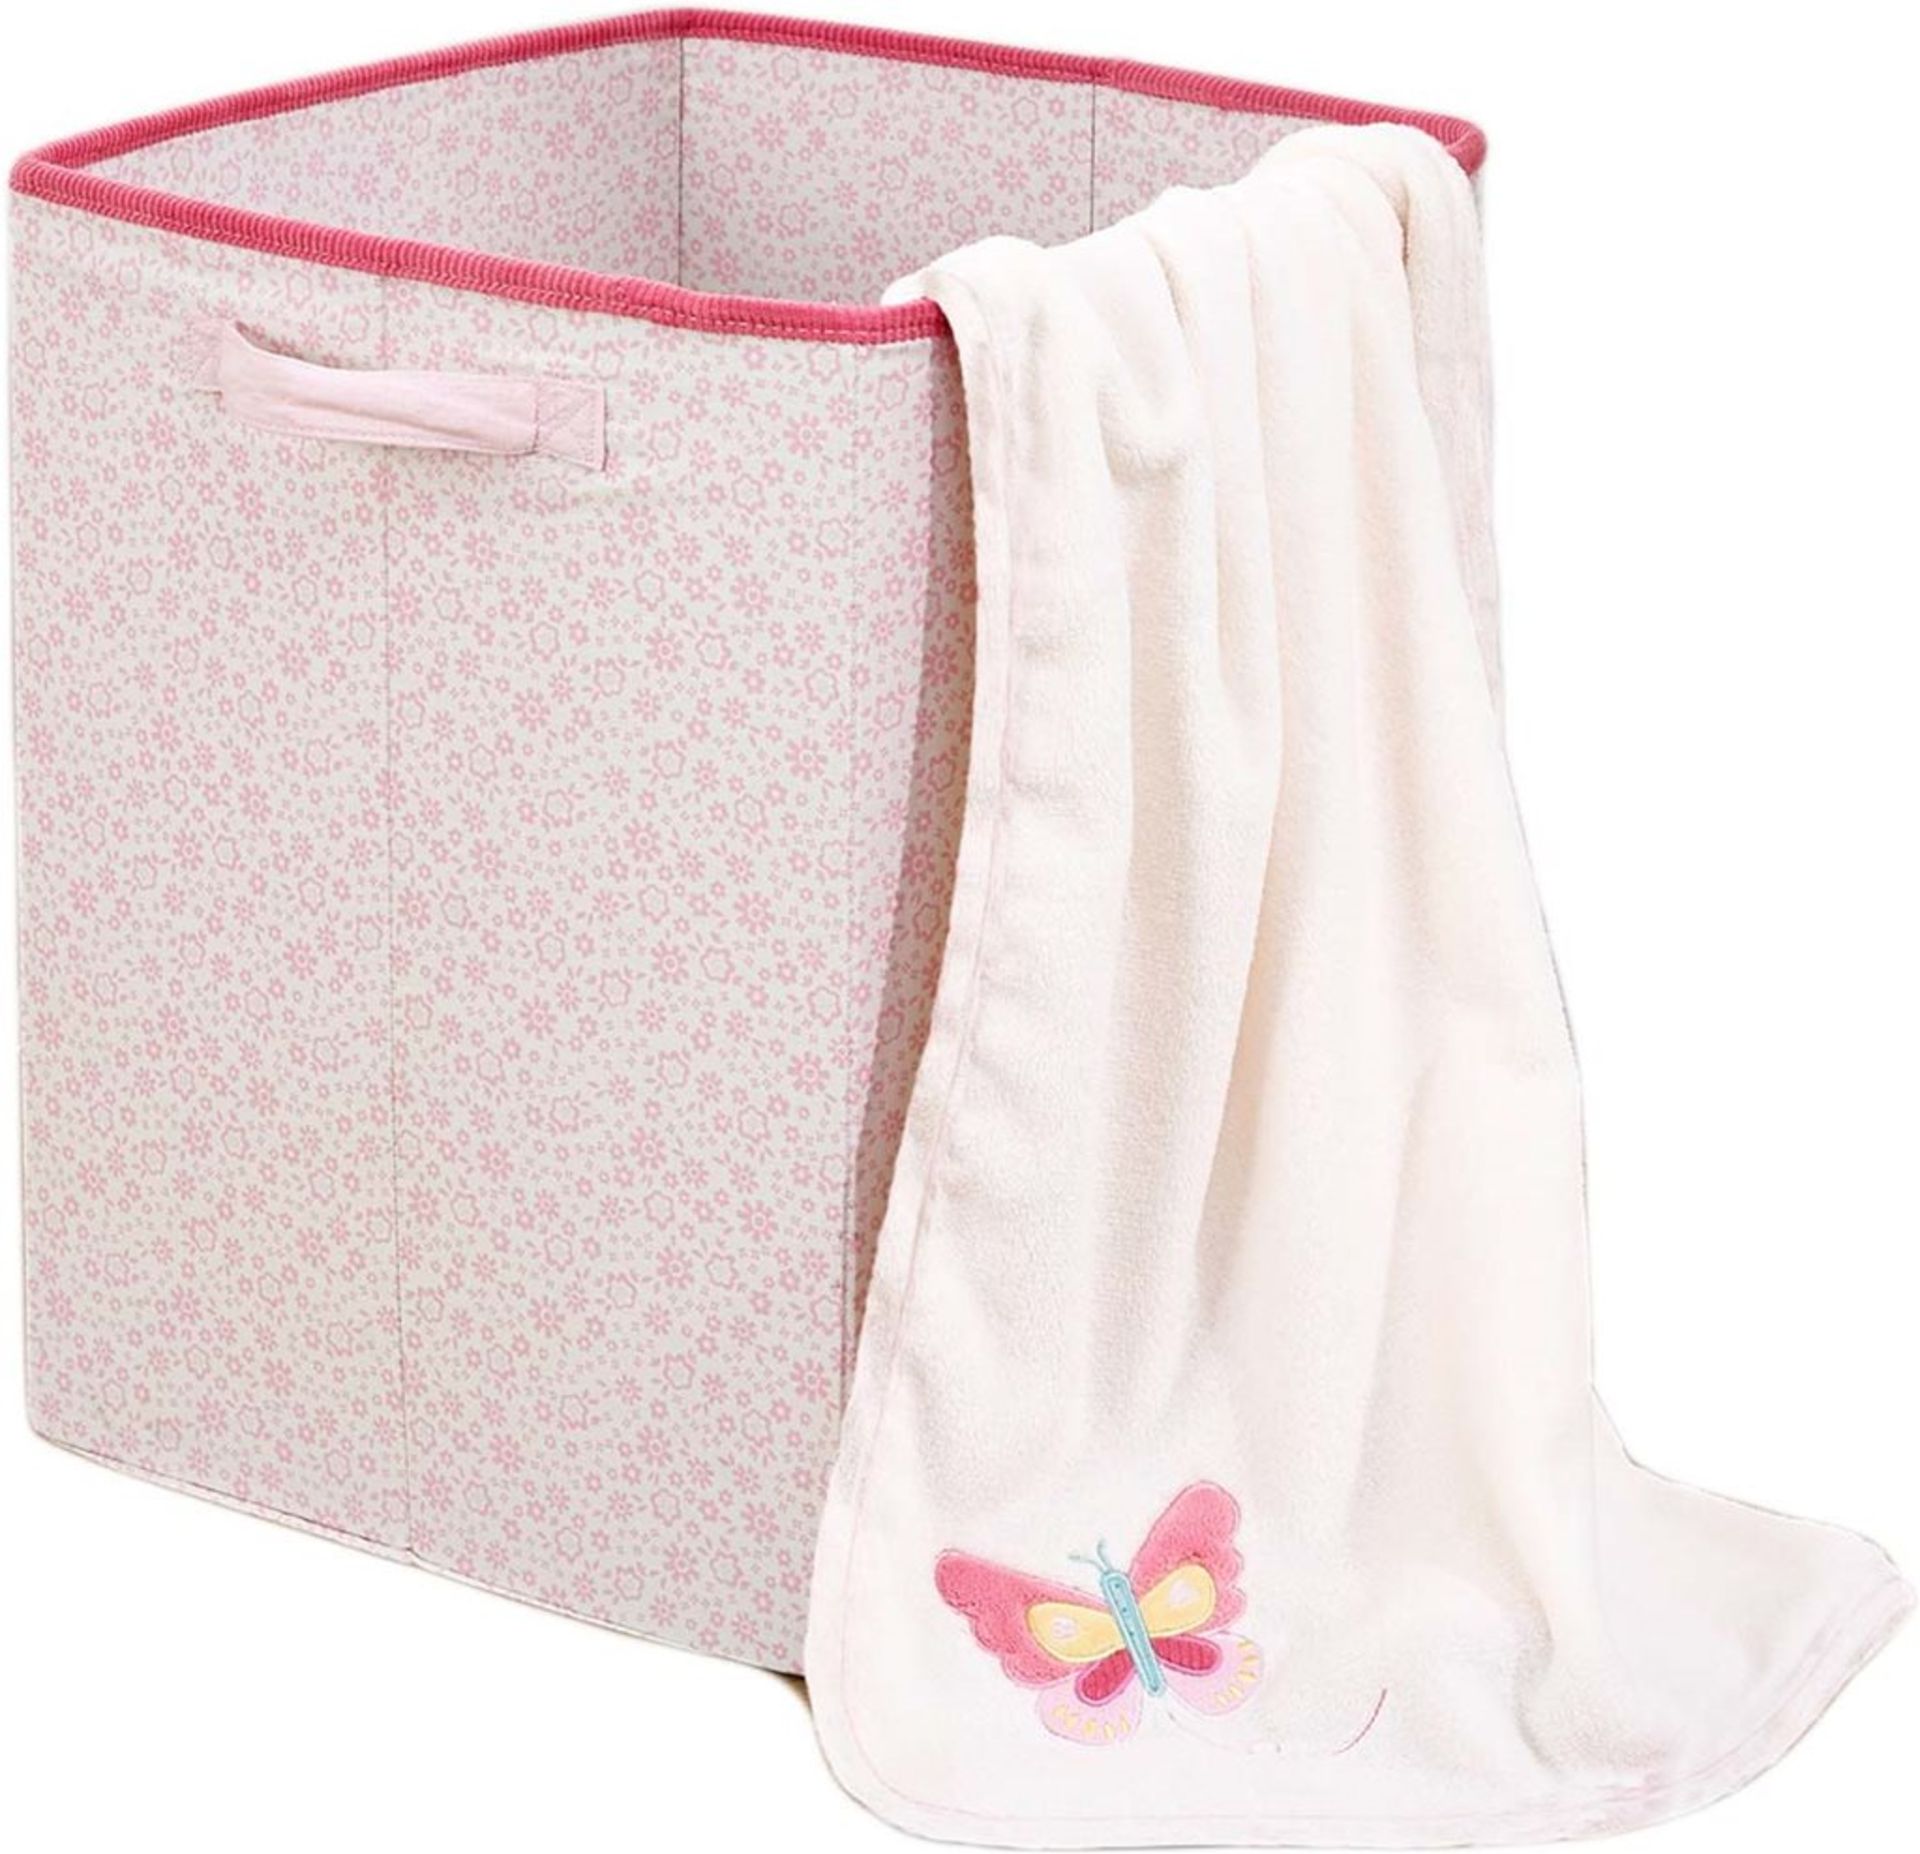 50 sets Beyond the Meadow Girls Storage Hamper/Toy Box/Laundry Basket (Pink) - Image 2 of 2